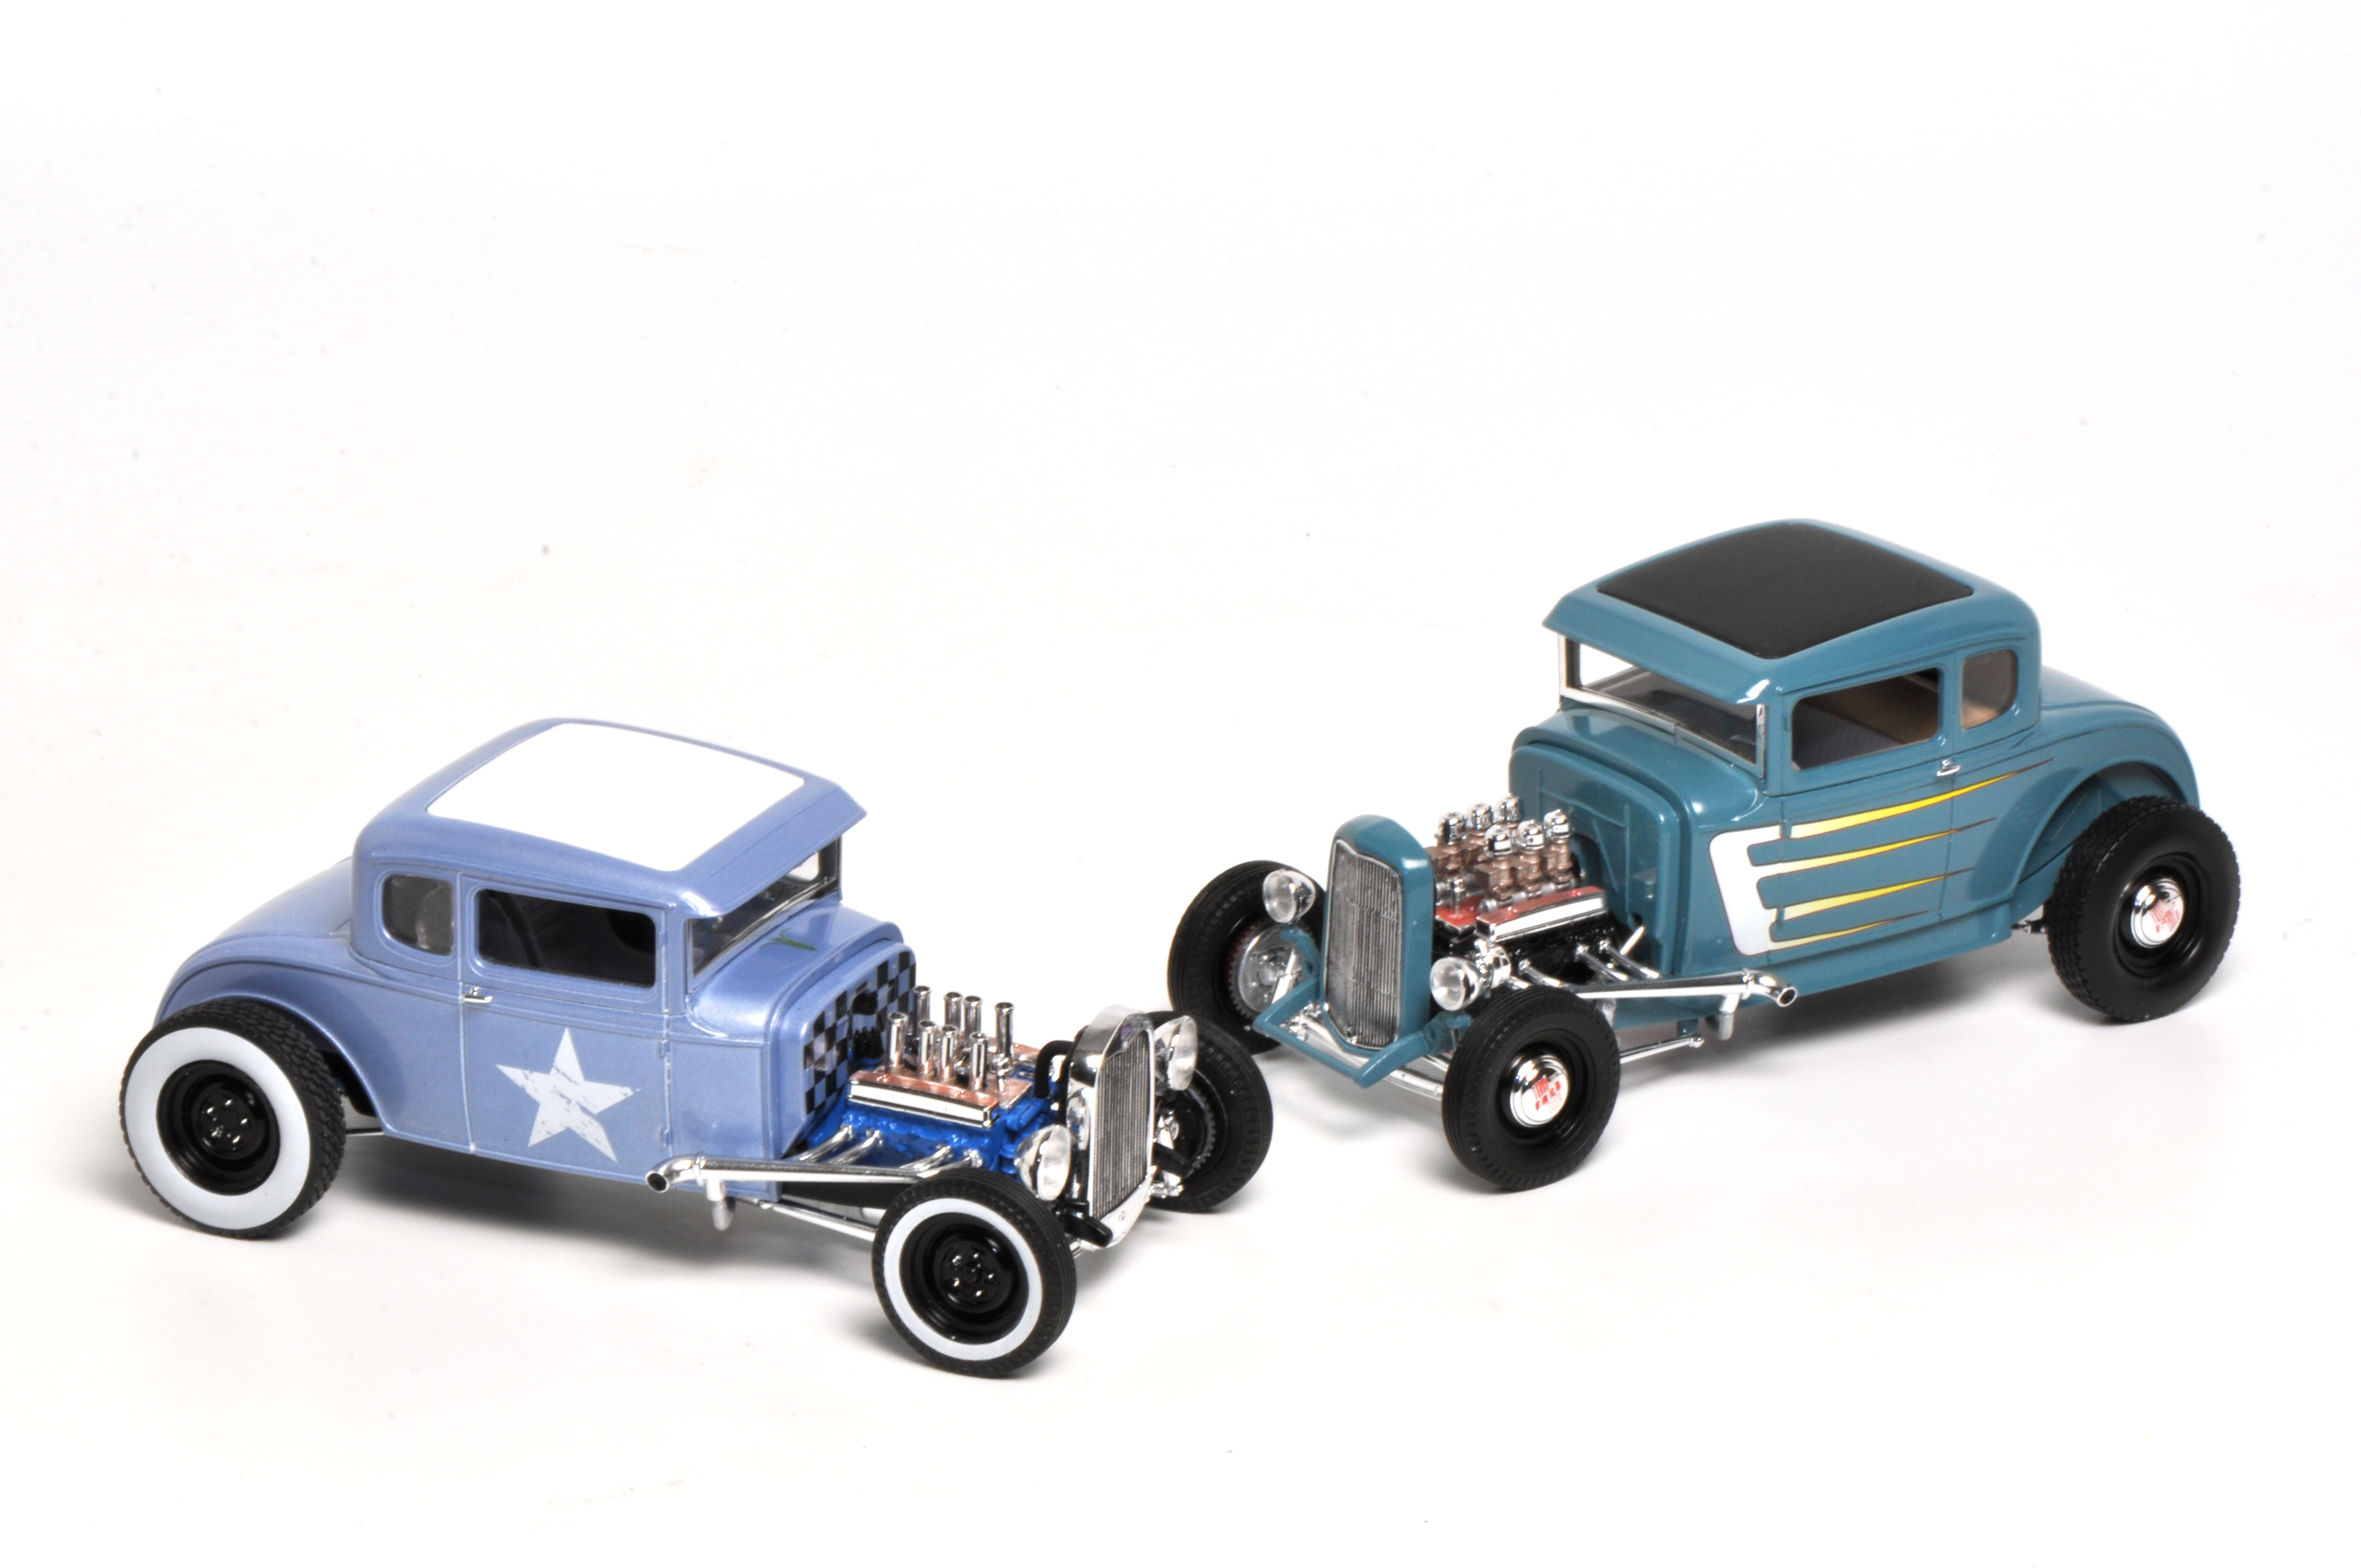 http://finescale.com/~/media/images/workbench-reviews/2022/02-february/revell-1930-model-a-coupe-2n1/01b.jpg